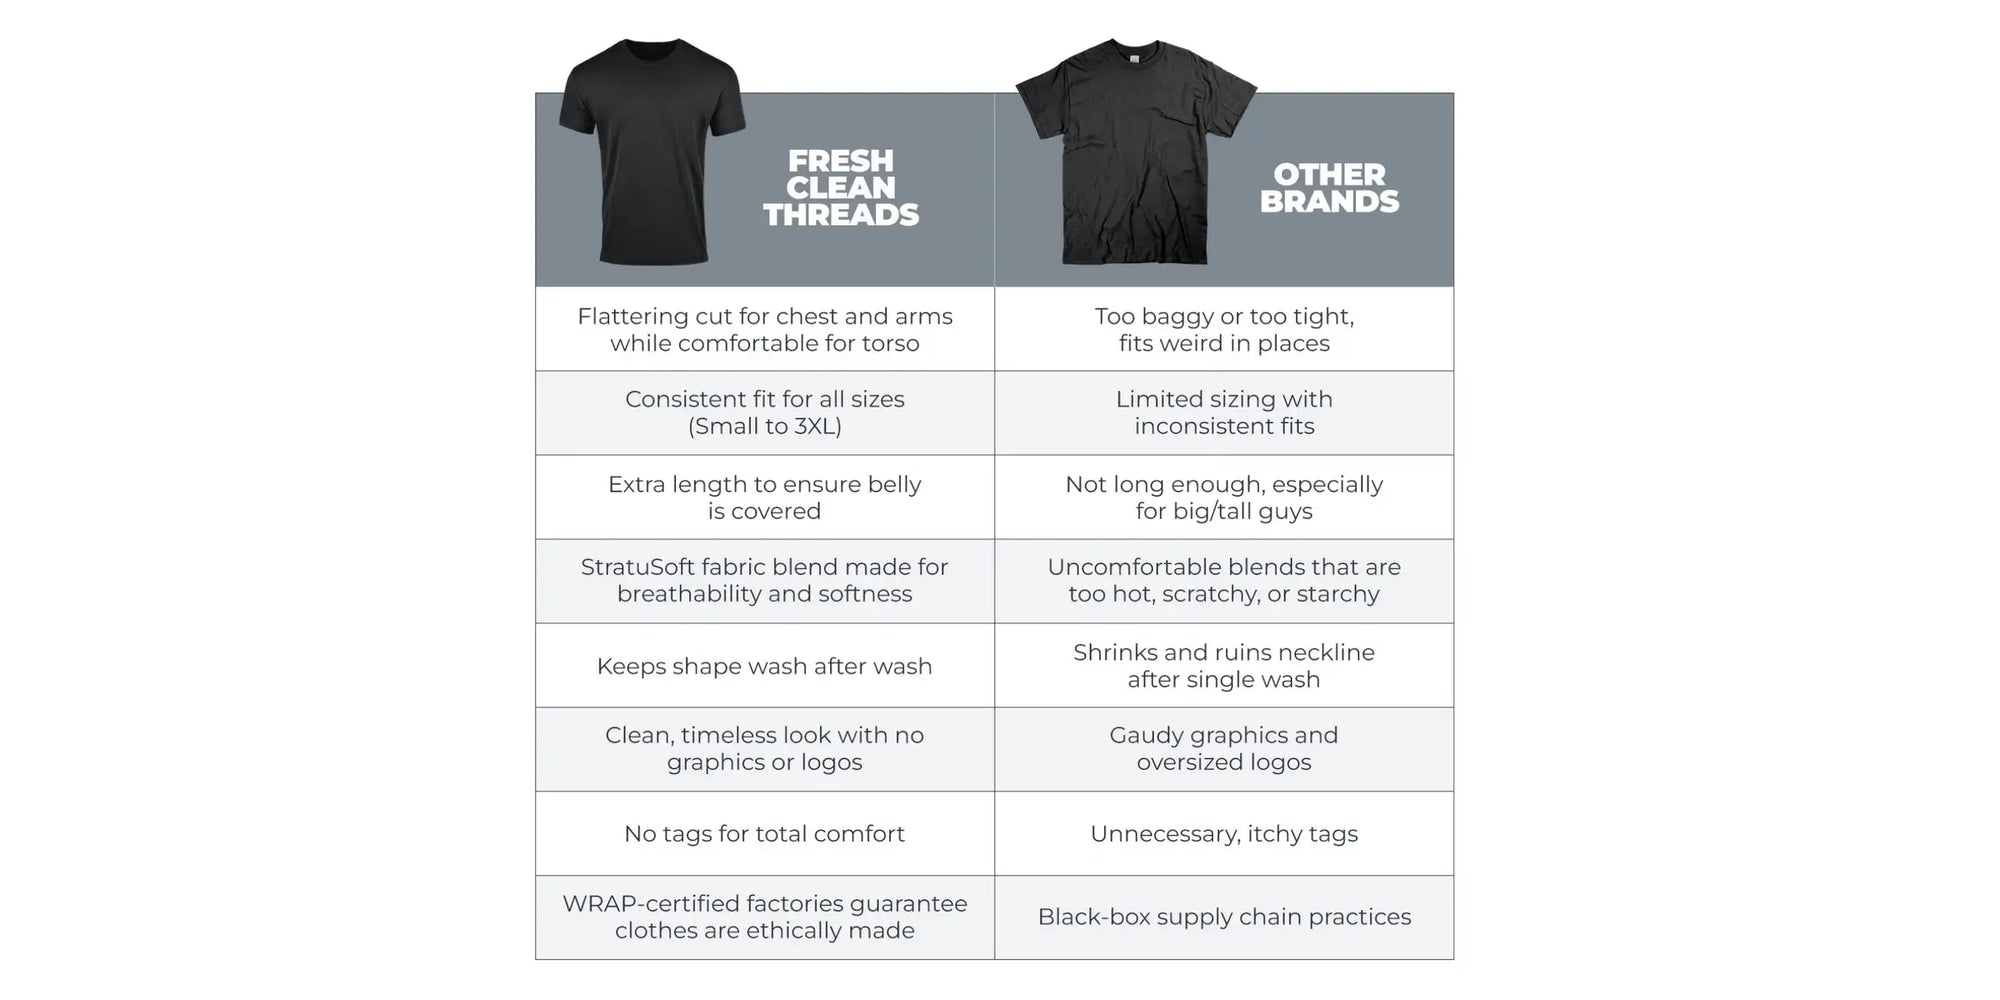 Compare Fresh Clean Threads Versus other Tee shirt companies